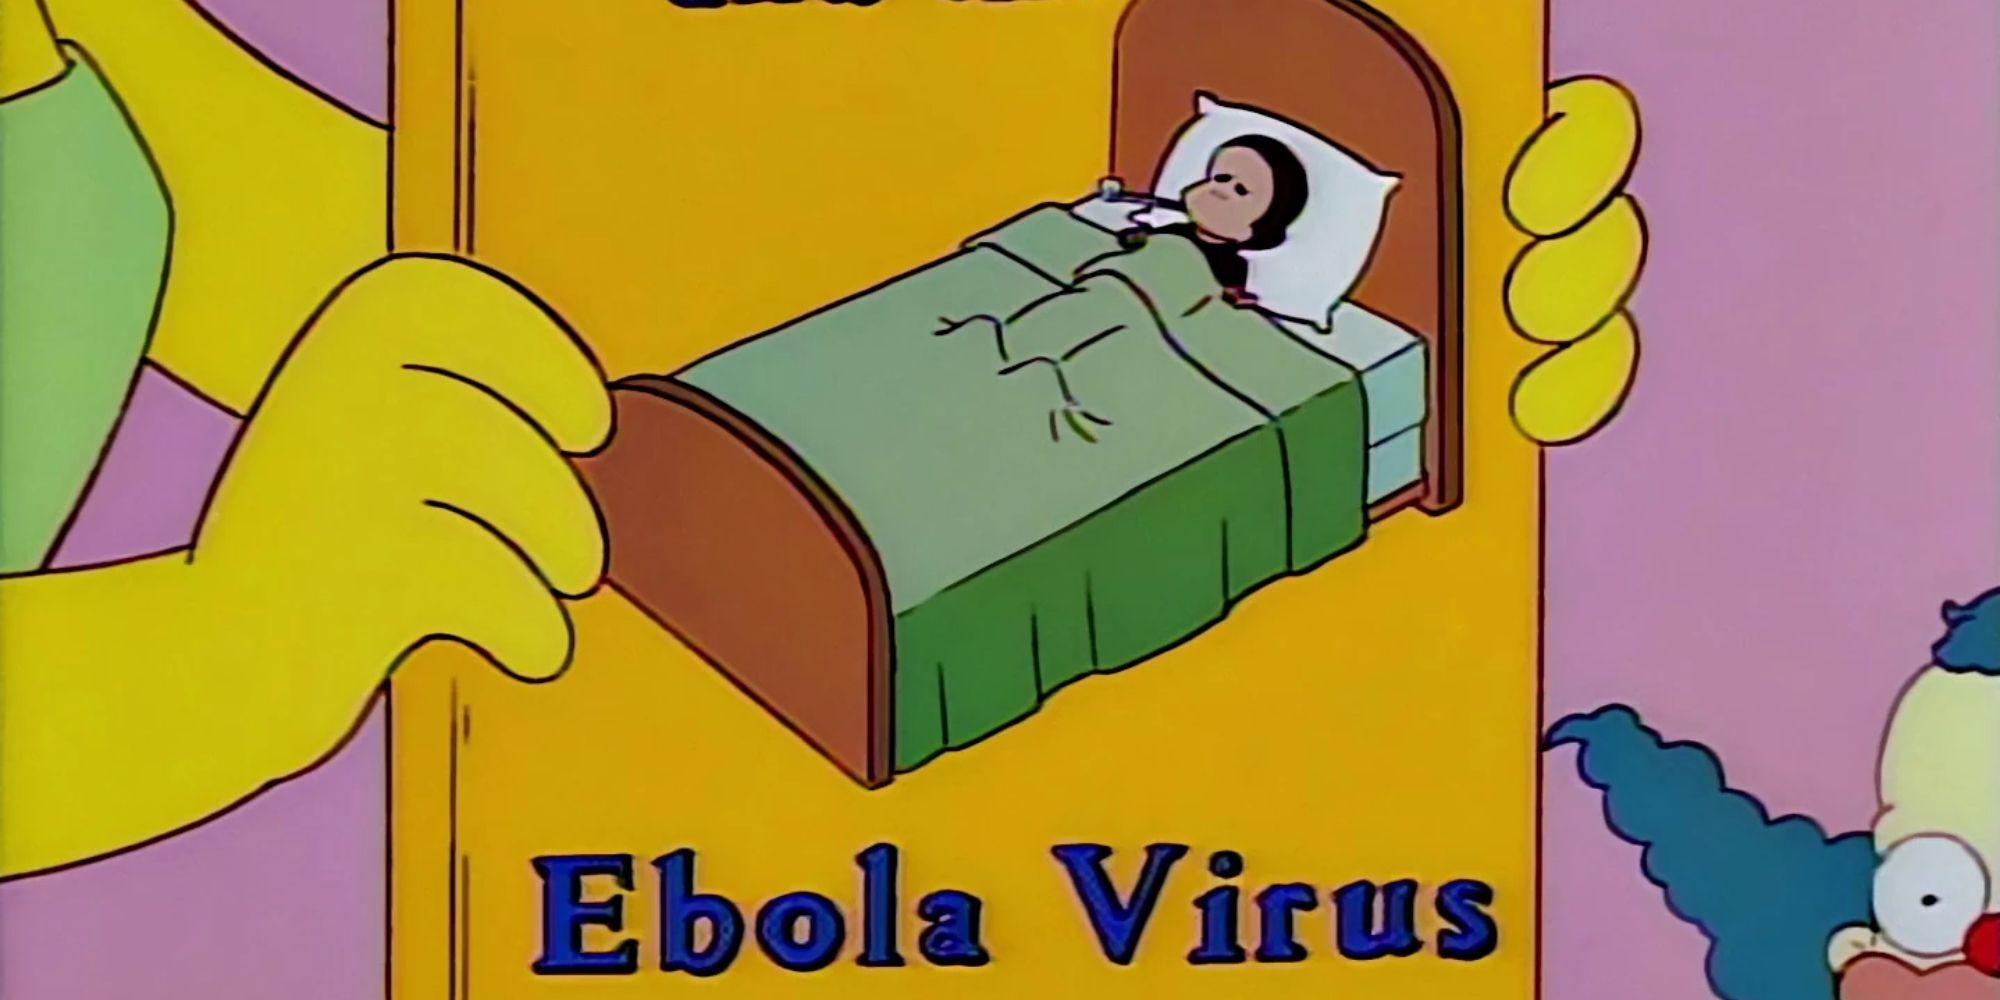 Ebola Virus book from The Simpsons